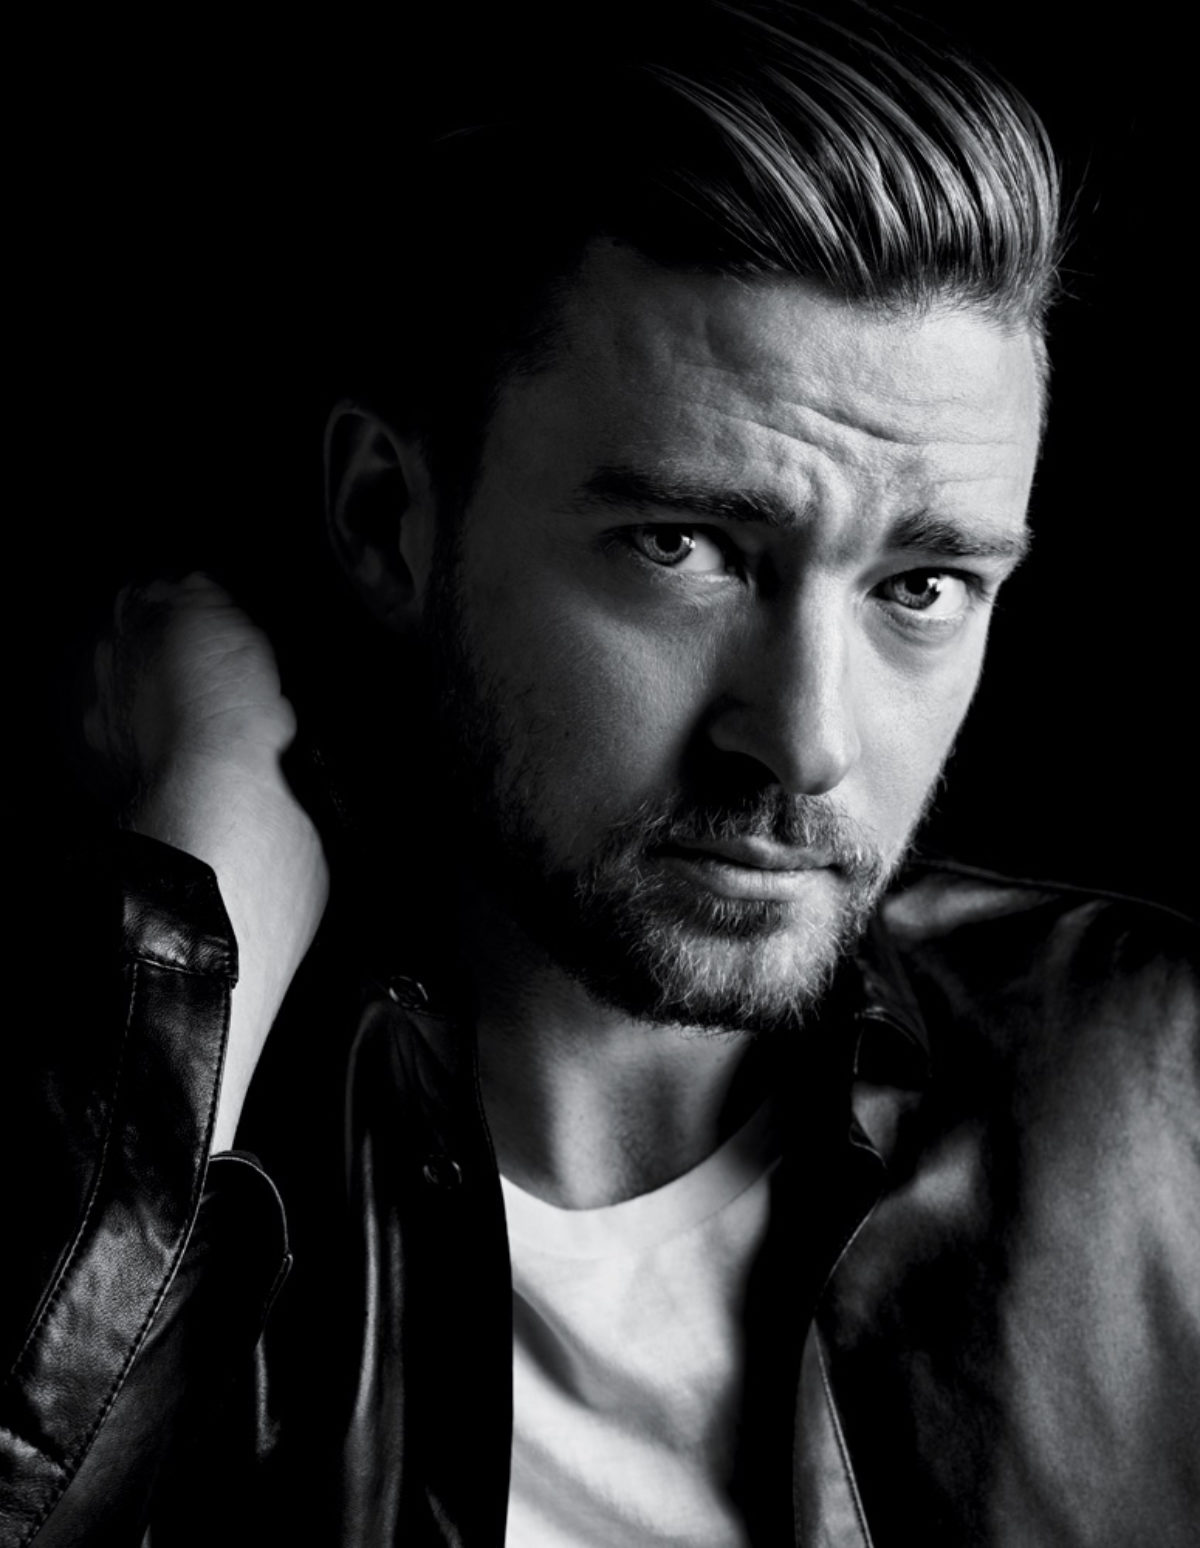 Justin Timberlake Reveals '20/20 Experience' Part 2 Due Sept. 30